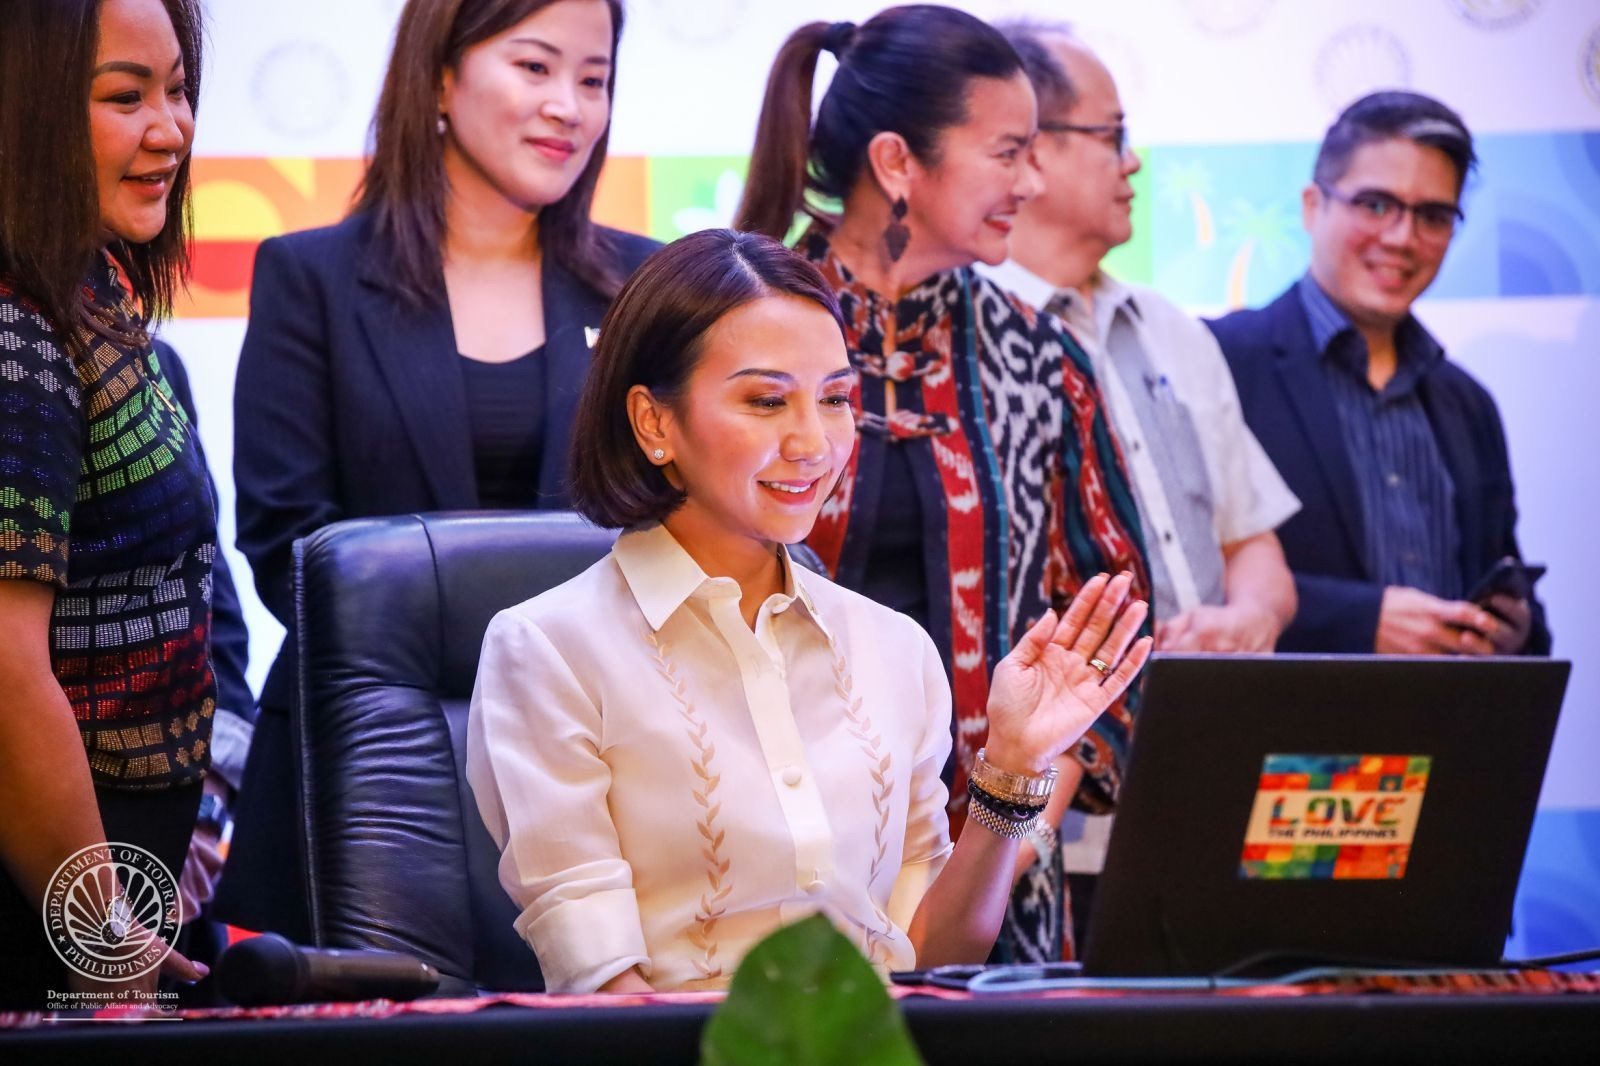 Philippines launches tourist call center, welcomes 4 million visitors